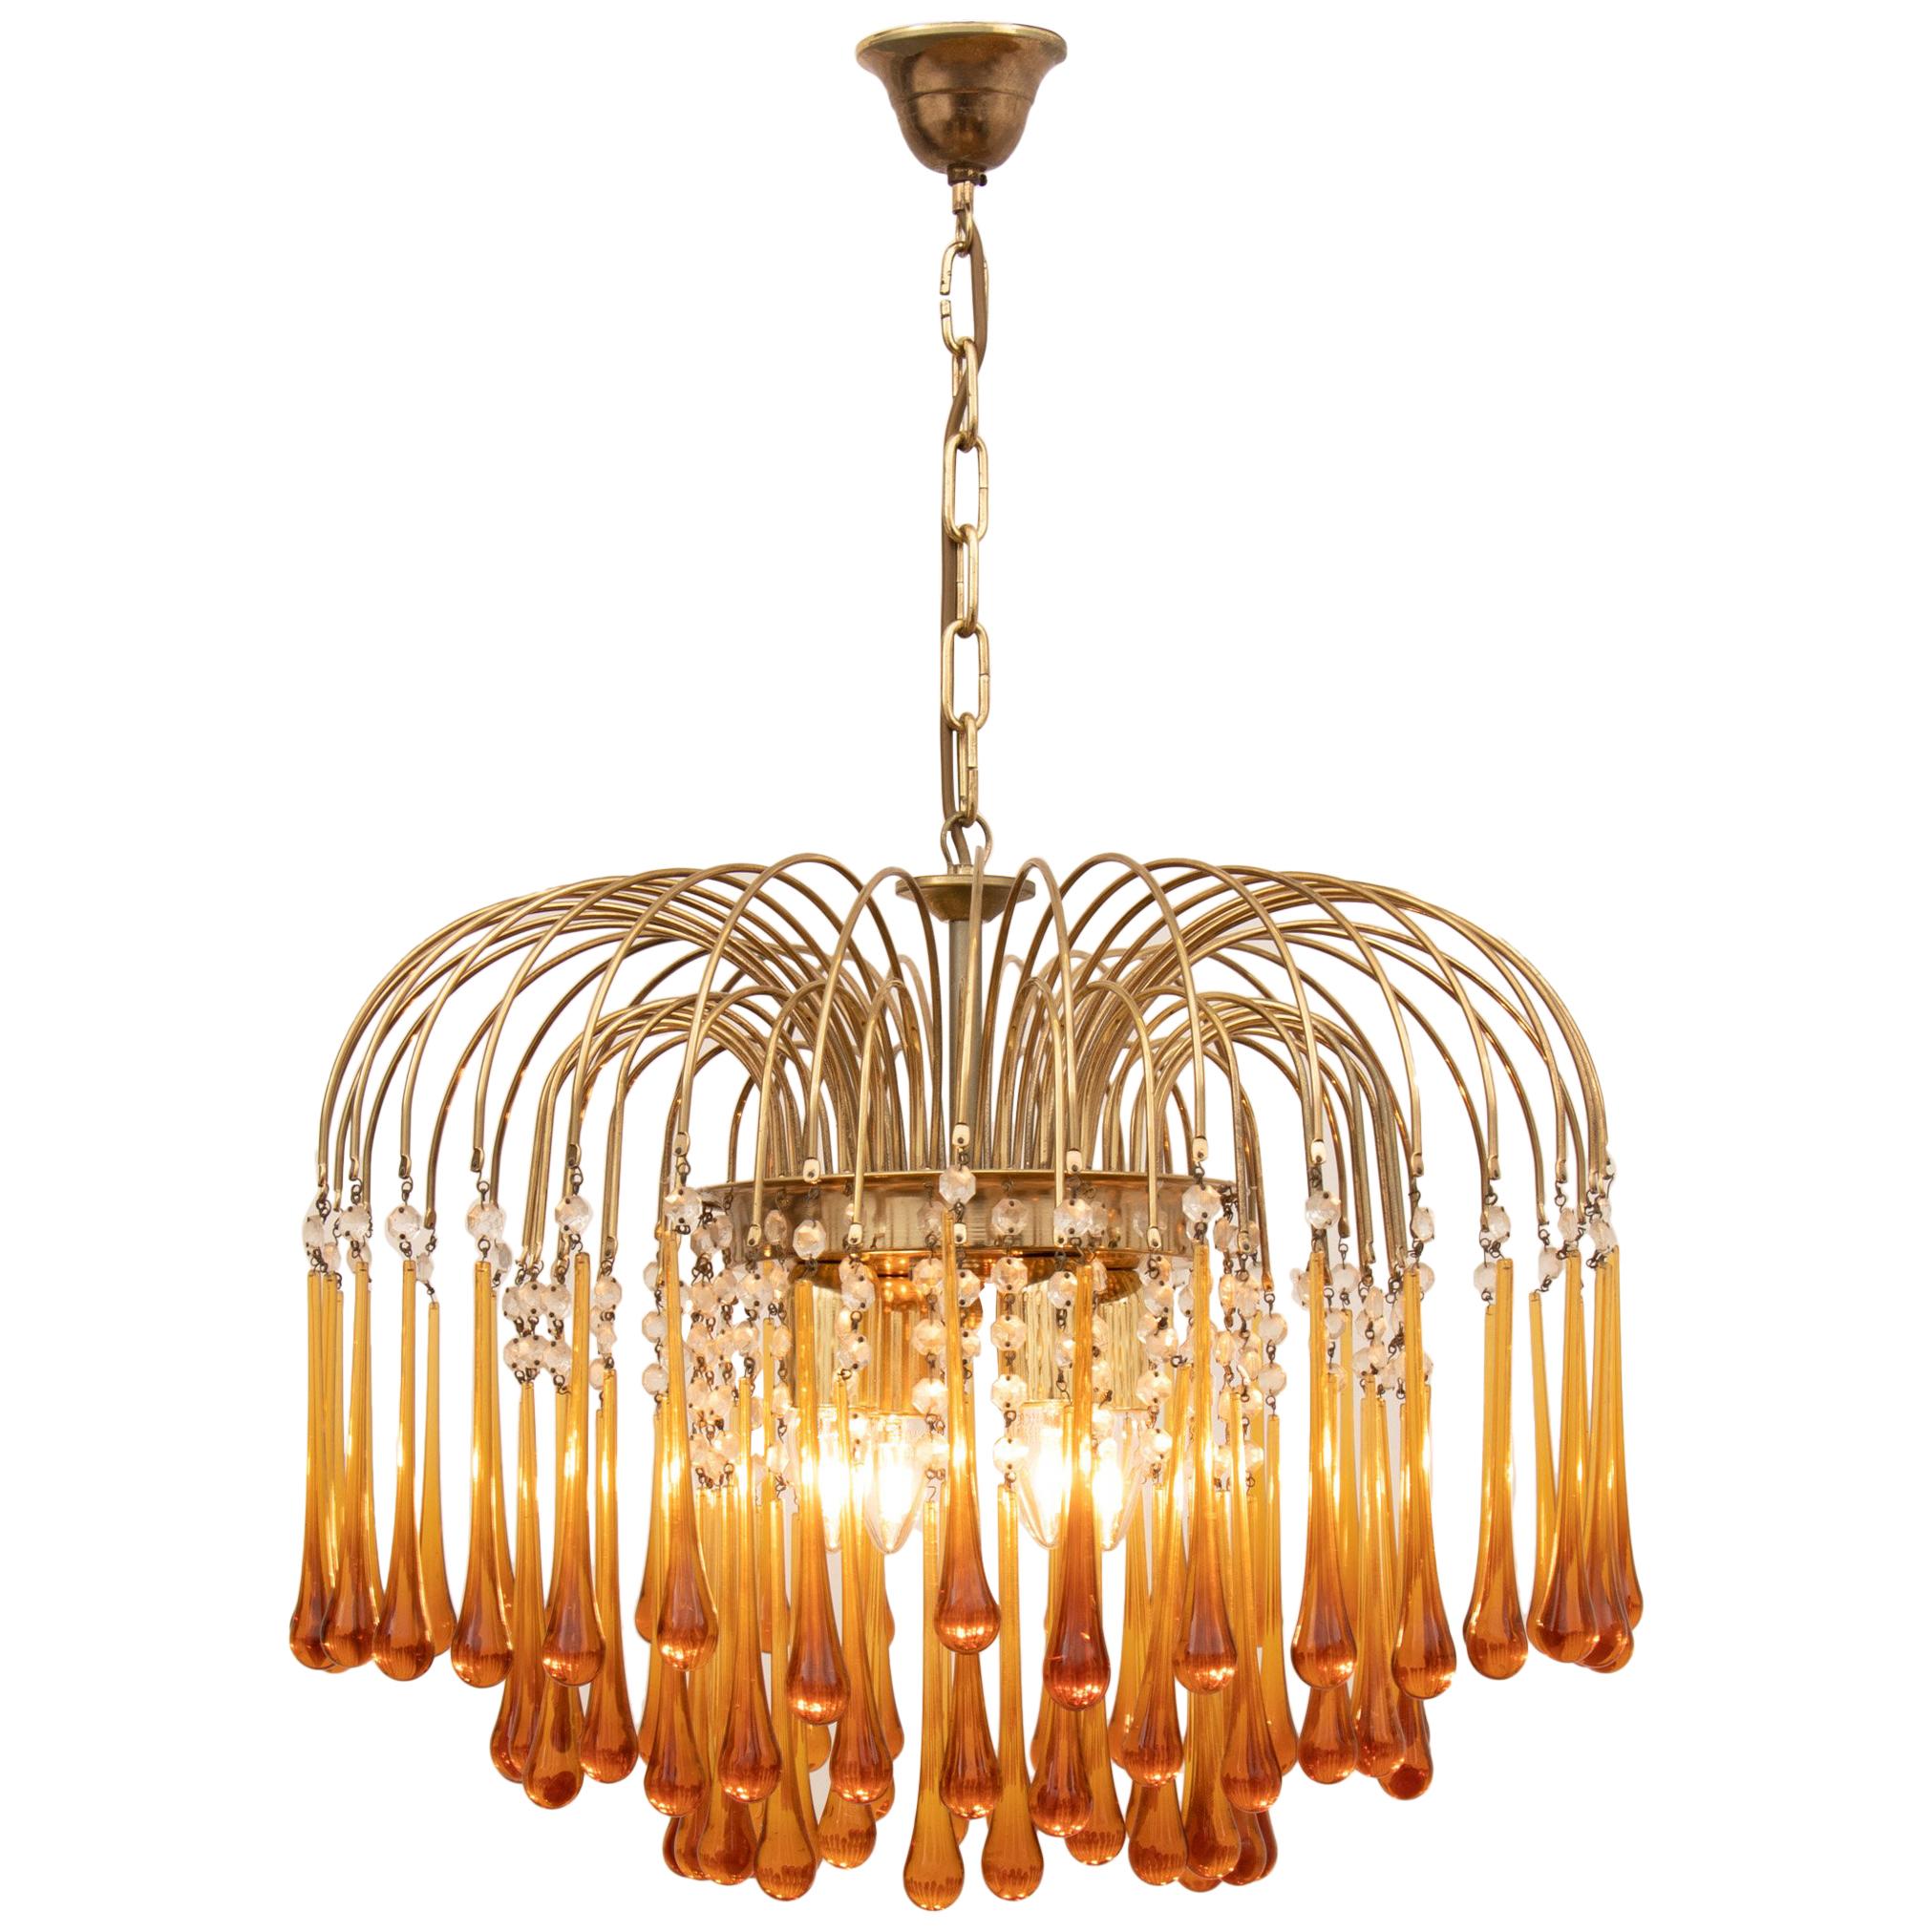 1960s Italian Brass and Murano Amber Glass Tear Drop Chandelier by Paolo Venini